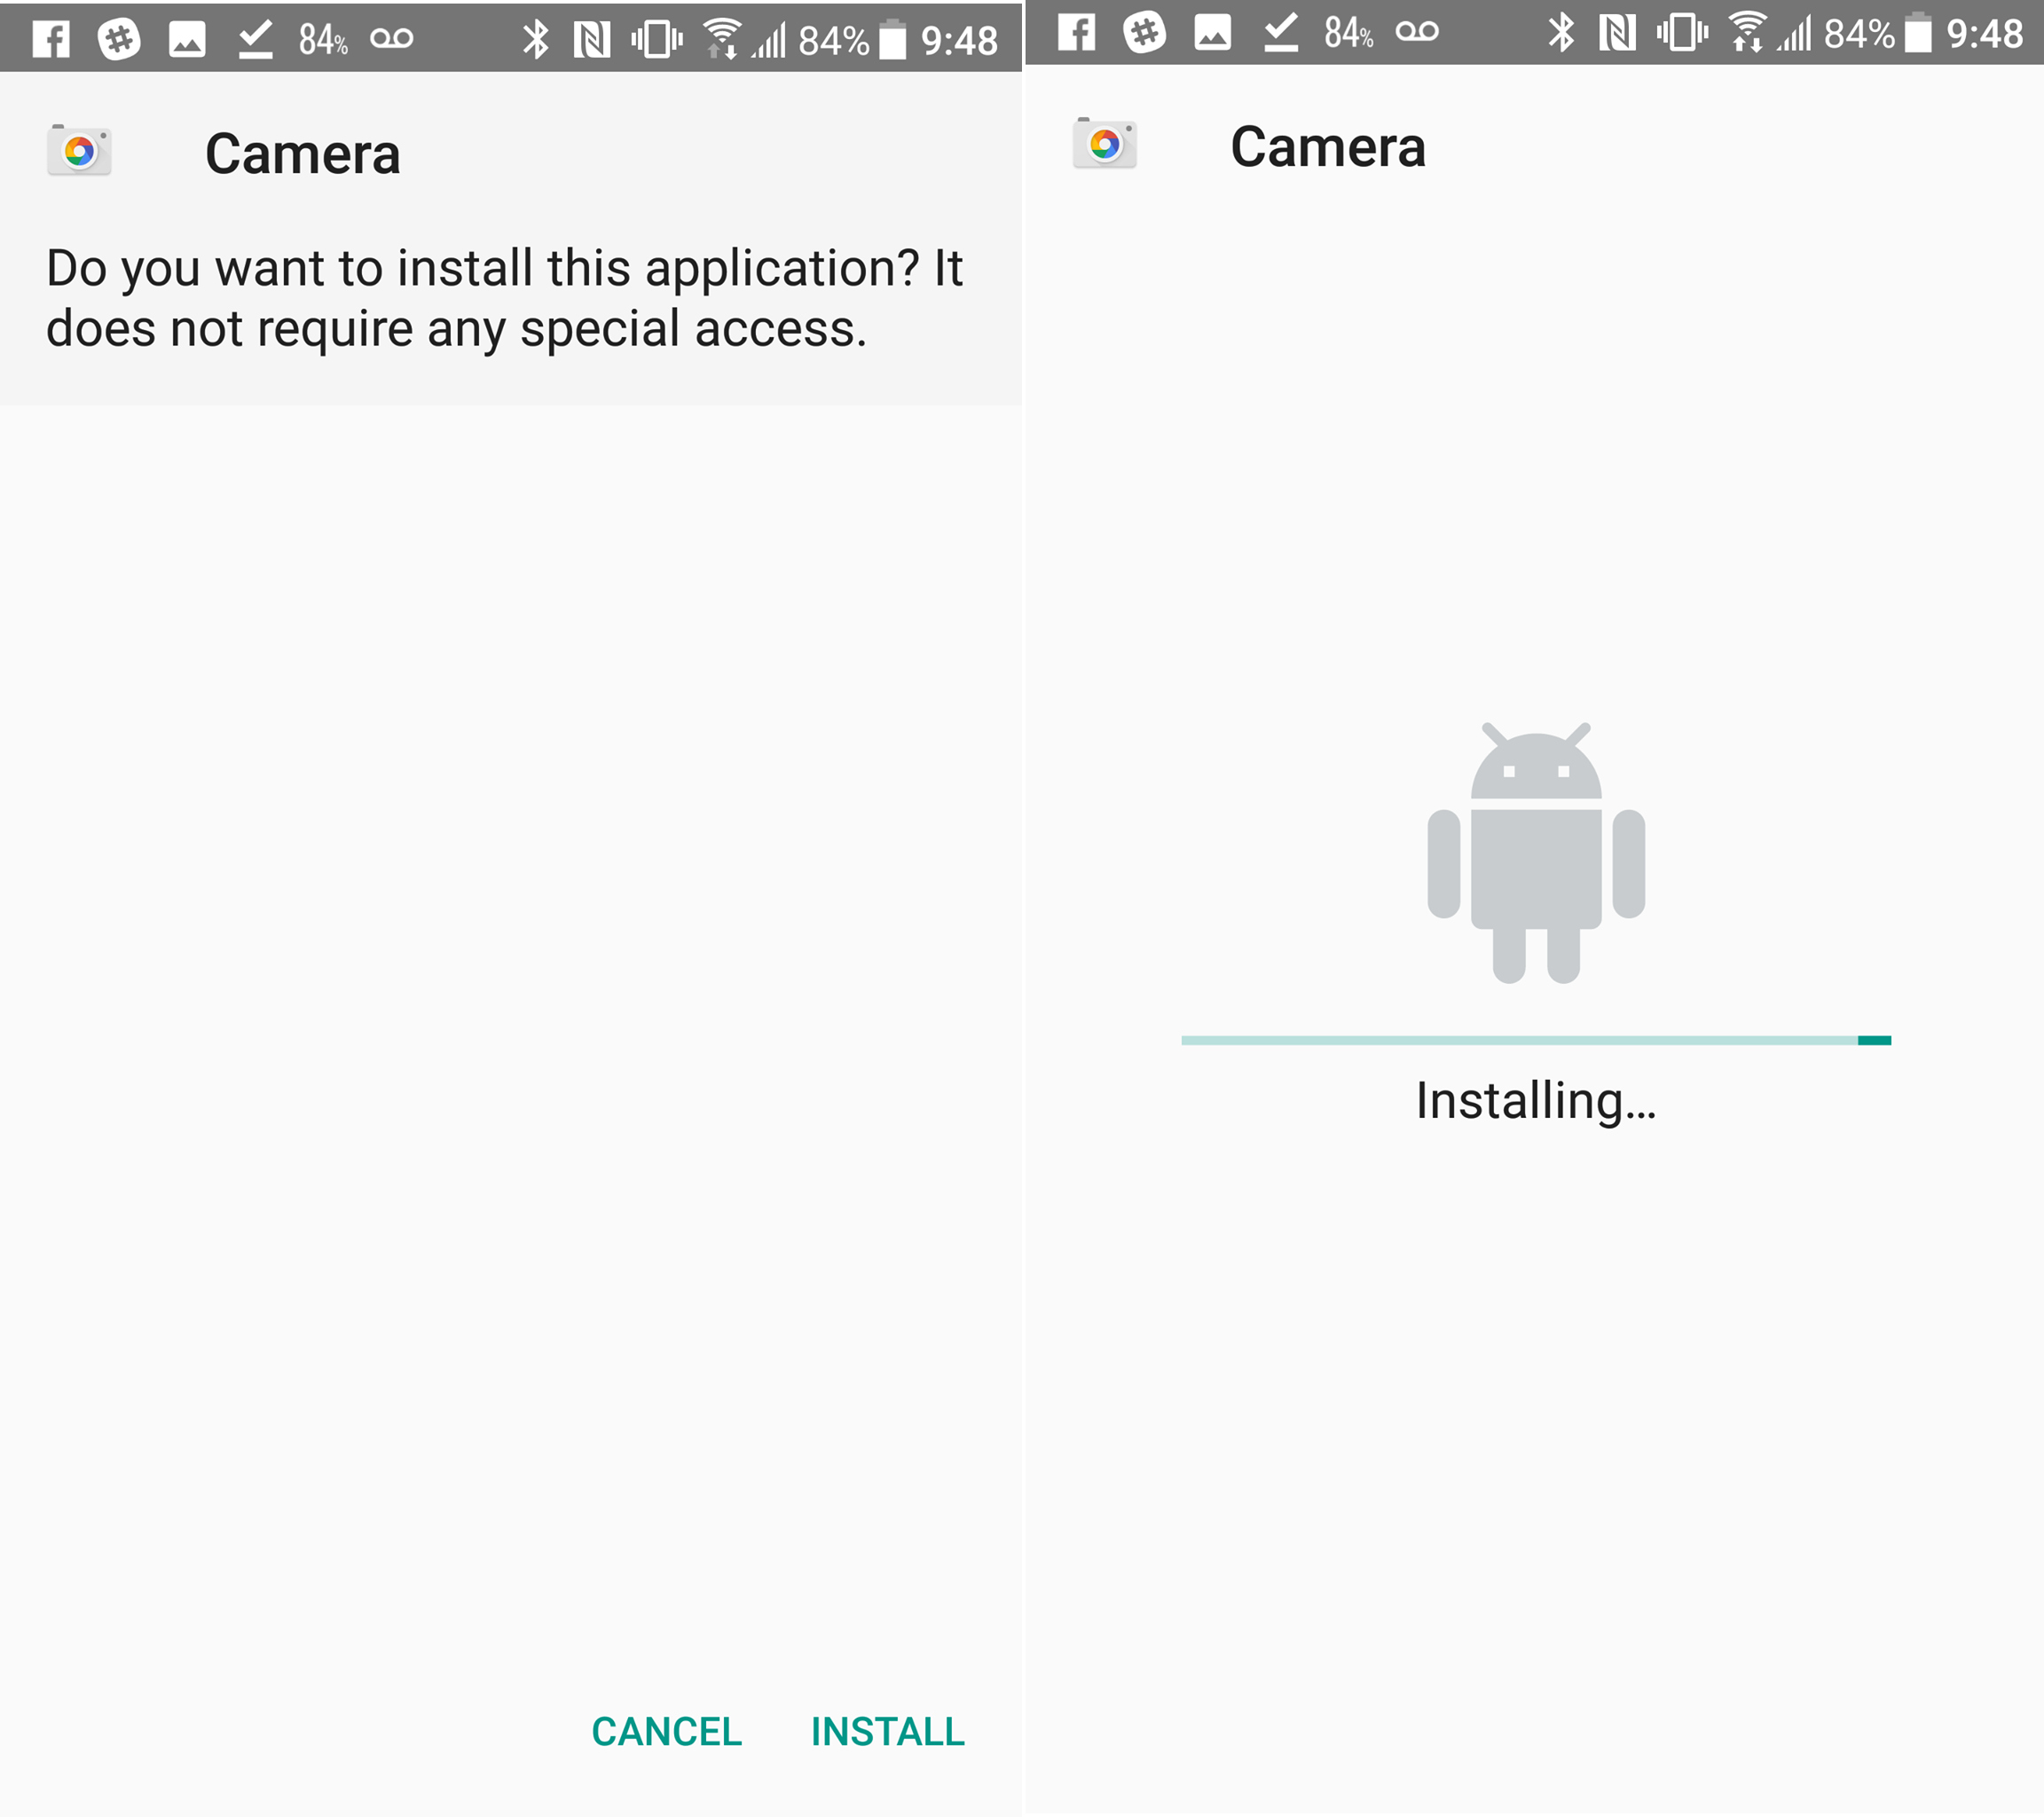 An image showing an Android phone asking to install the Pixel camera app